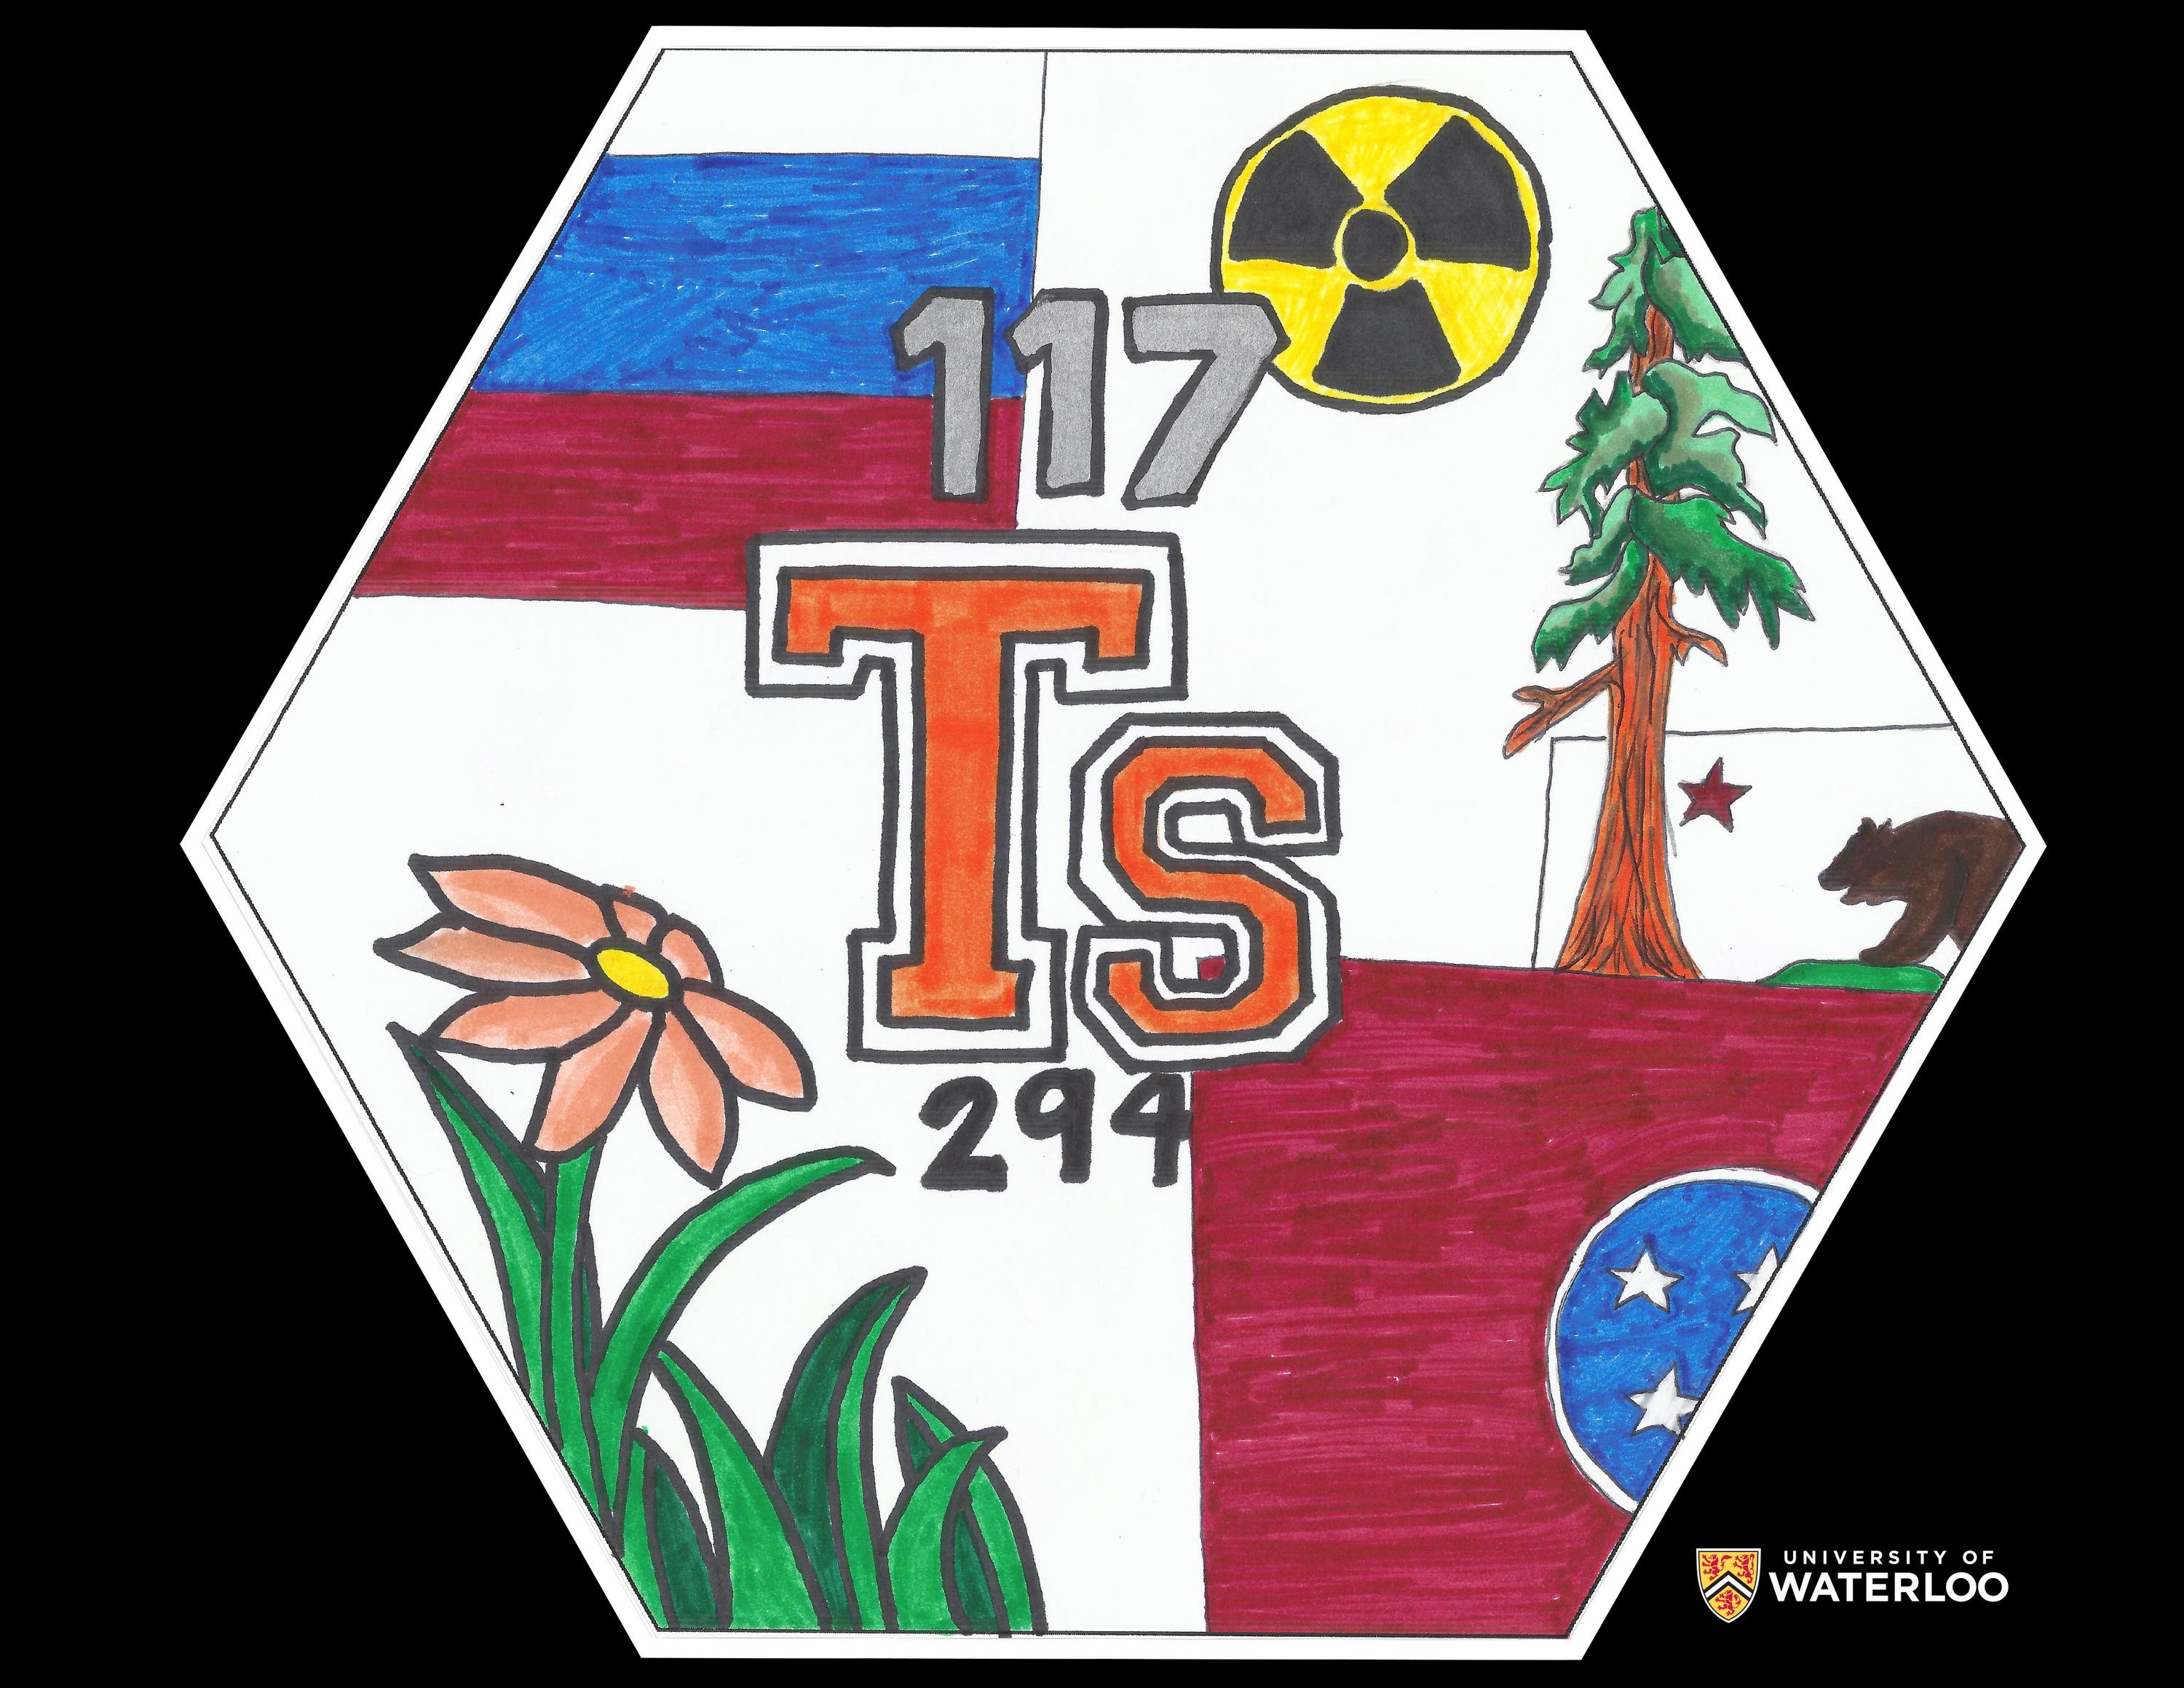 Coloured pen on white paper. The chemical symbol “Ts” is shown centre in Vanderbilt University orange and white font. Above is atomic number “117”; below atomic weight “294”. In the background are the Russian flag and radioactive symbol at the top; a pink flower in the lower left corner and the California State flag to the right.